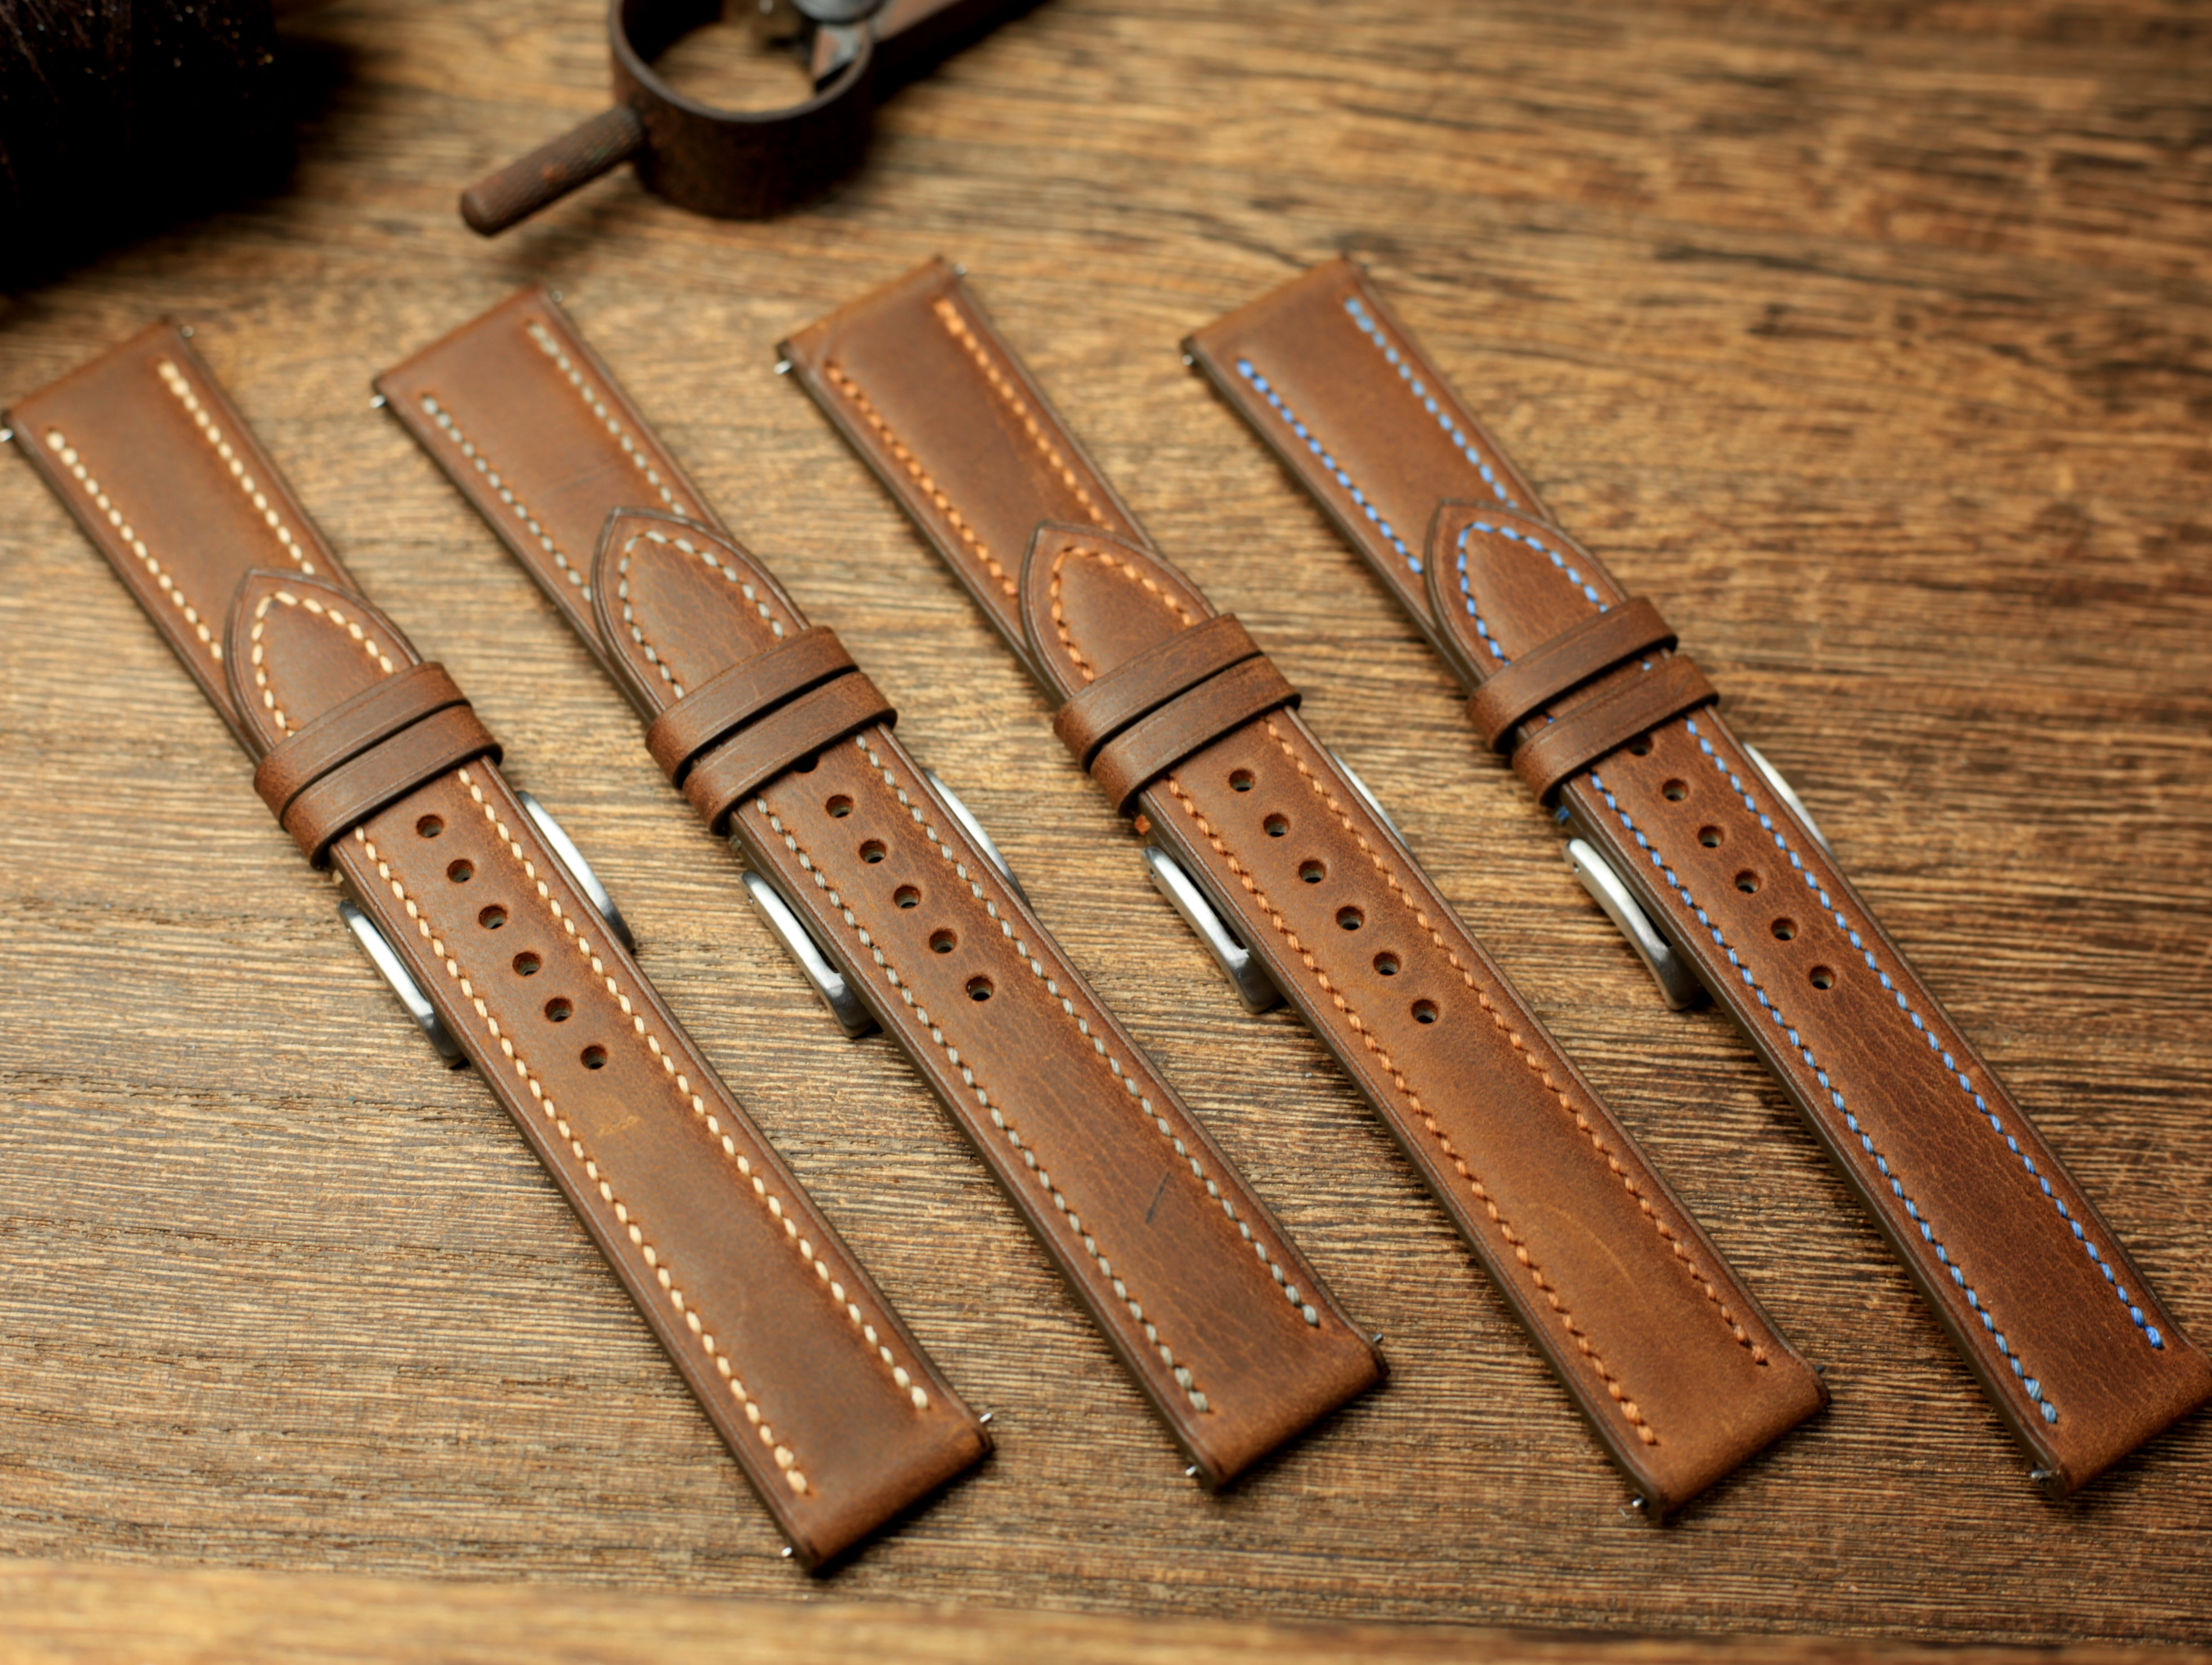 Waxy Leather Watch Strap, Quick Release